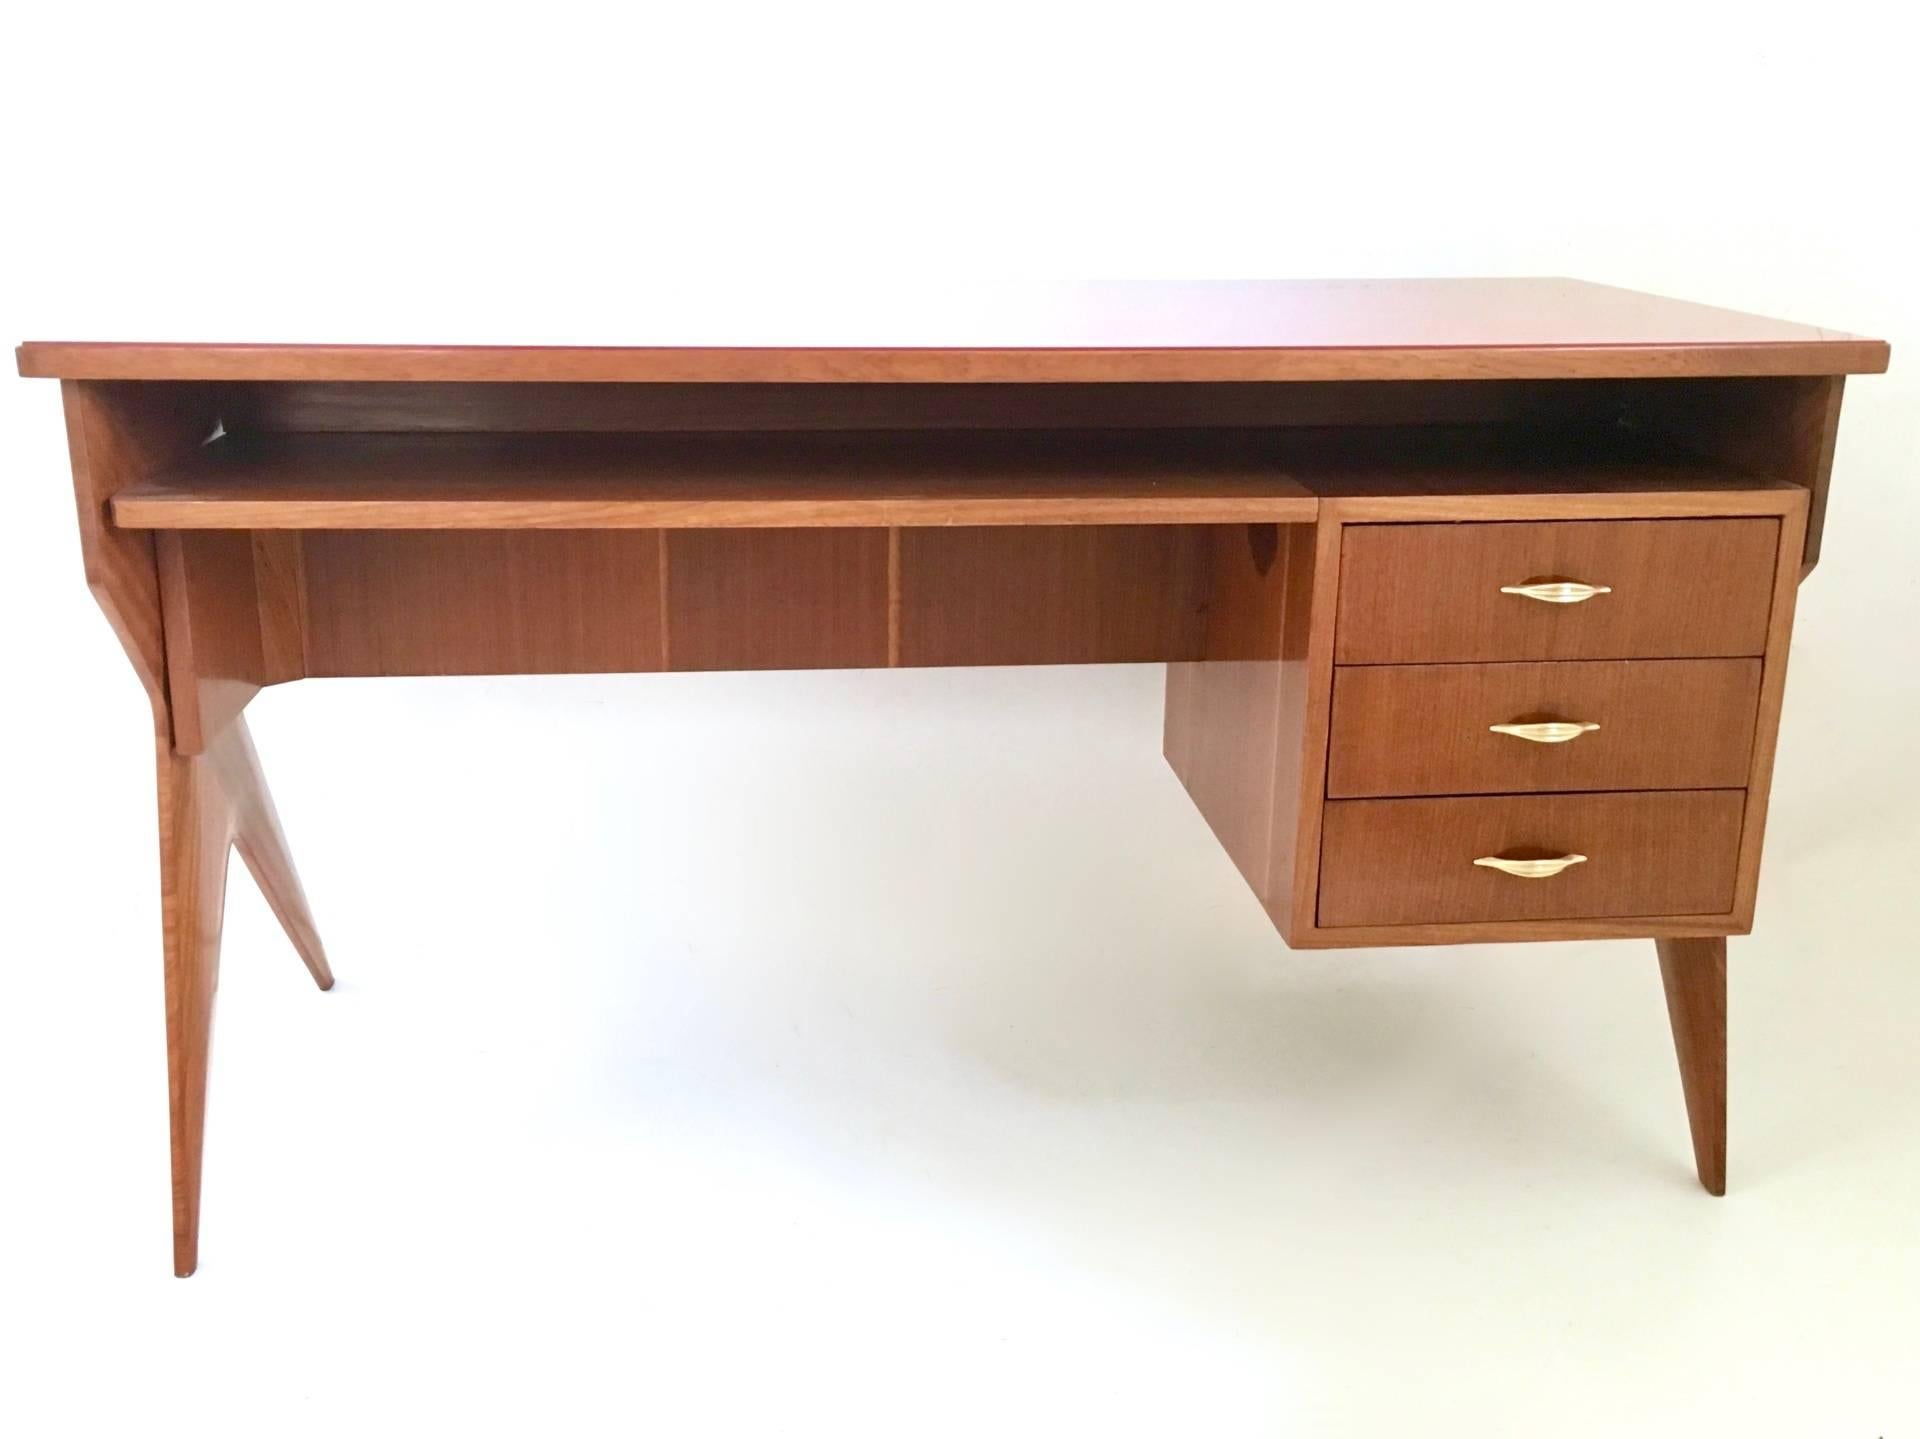 Made in mahogany and features a back-painted glass top and brass parts.
It has been restored and polished with shellac.
In perfect condition.